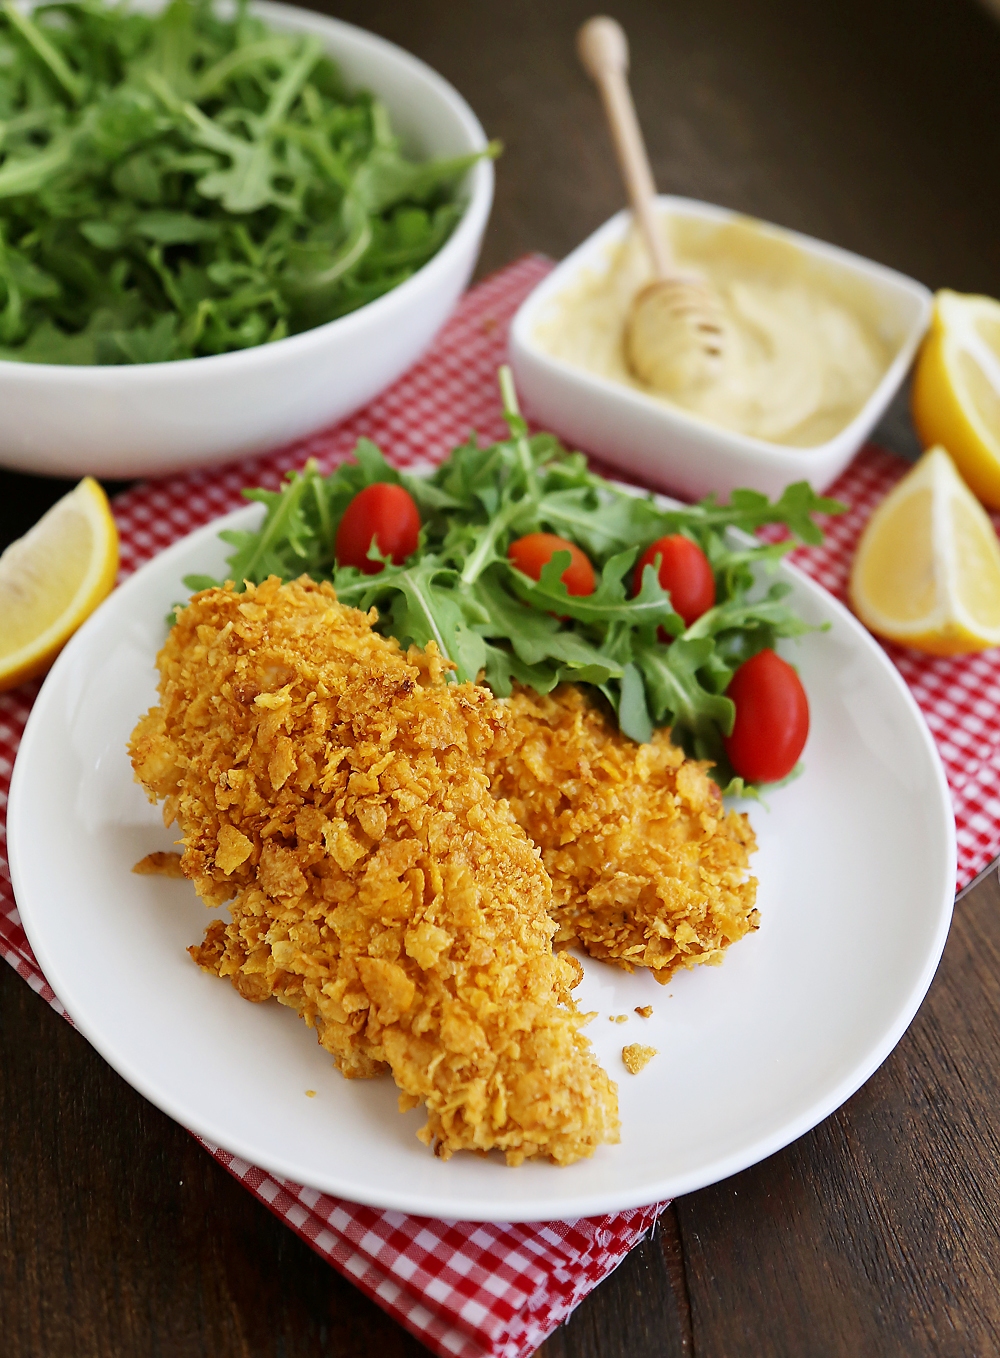 Crispy Honey-Dijon Baked Chicken Tenders - Cornflake crusted chicken with honey mustard dipping sauce (recipe included) makes a perfect weeknight meal that kids and adults will love! Thecomfortofcooking.com